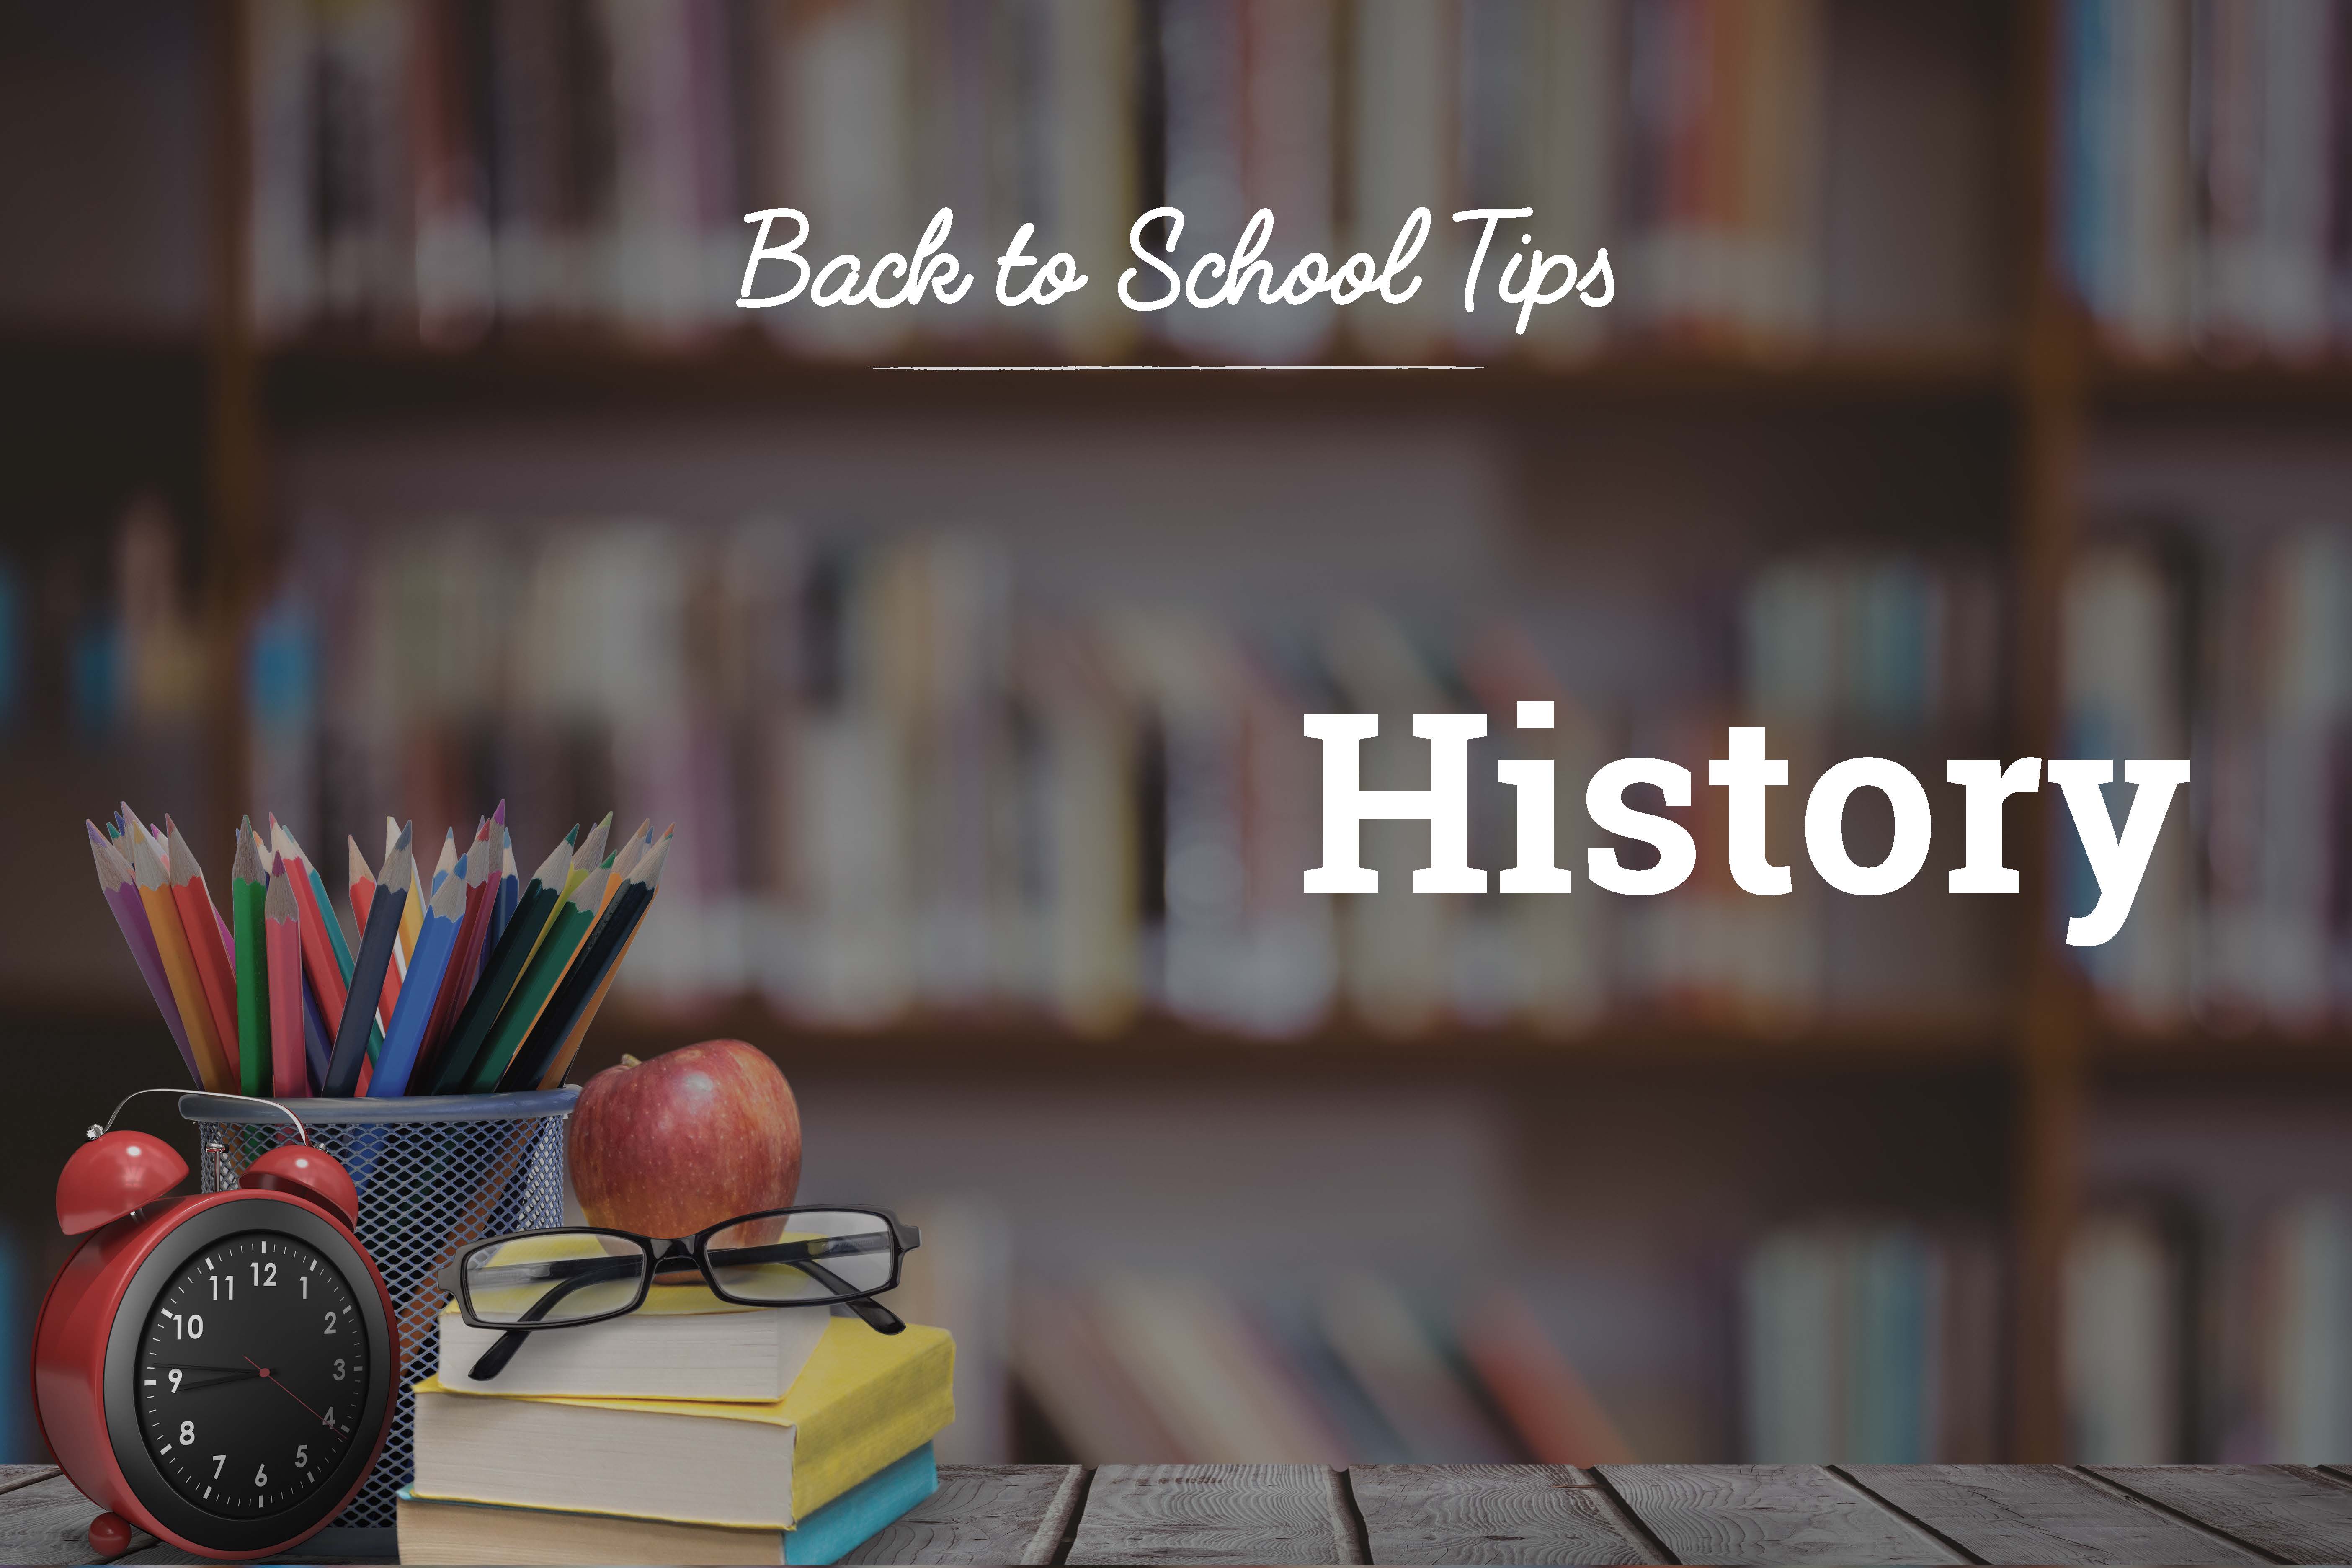 Become a Master of History This Year: ResponsiveEd’s John Heitzenrater Tells You How